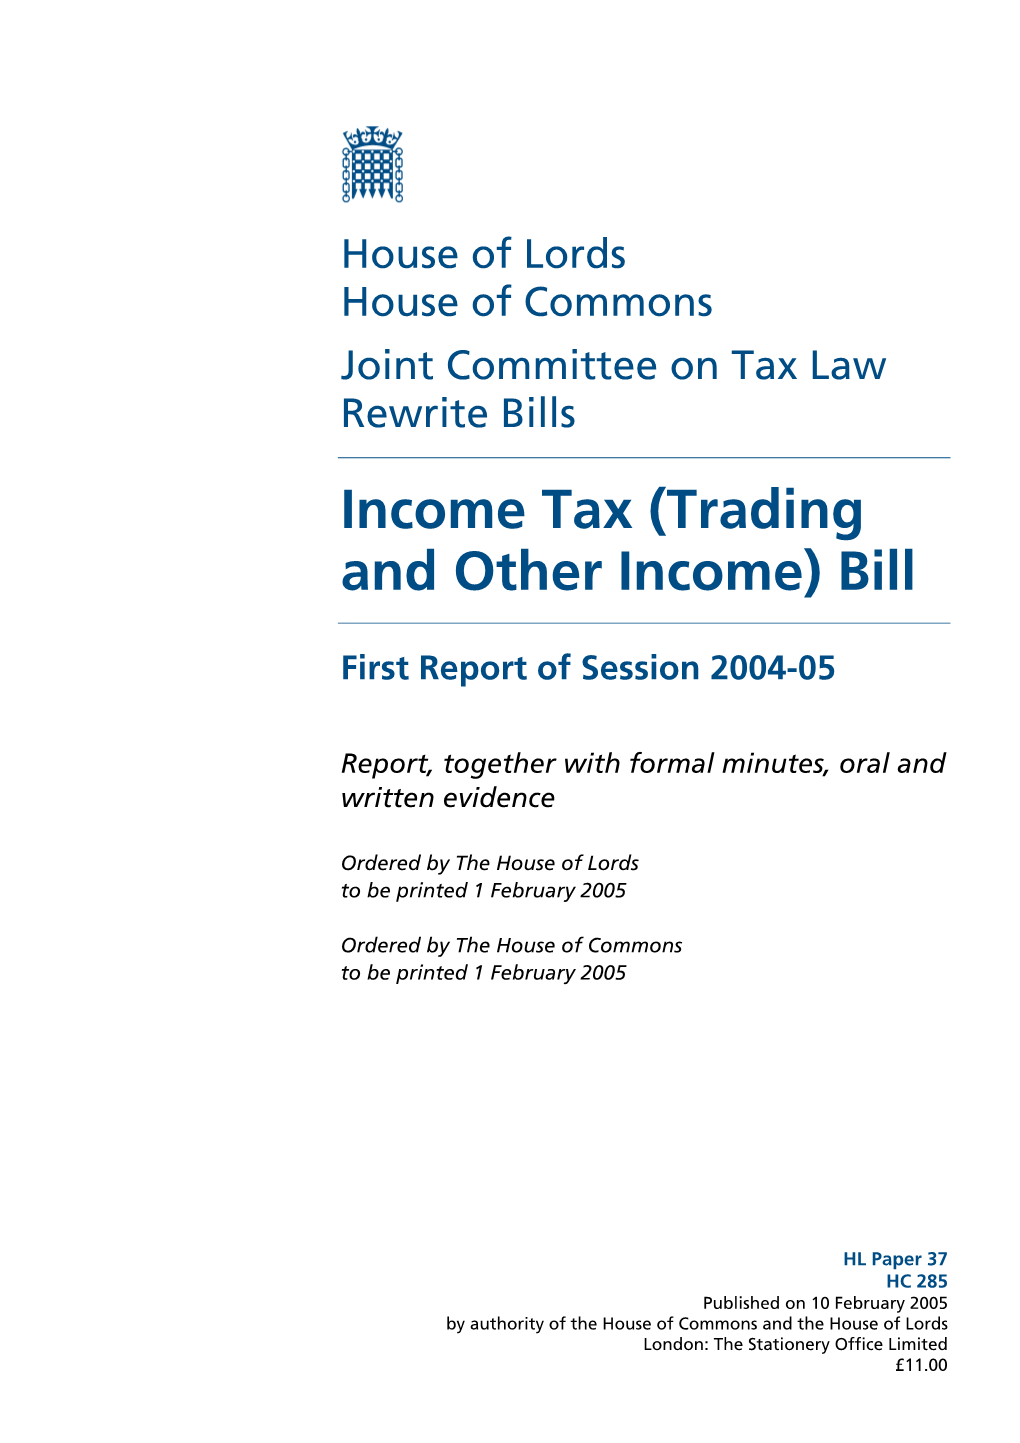 Income Tax (Trading and Other Income) Bill